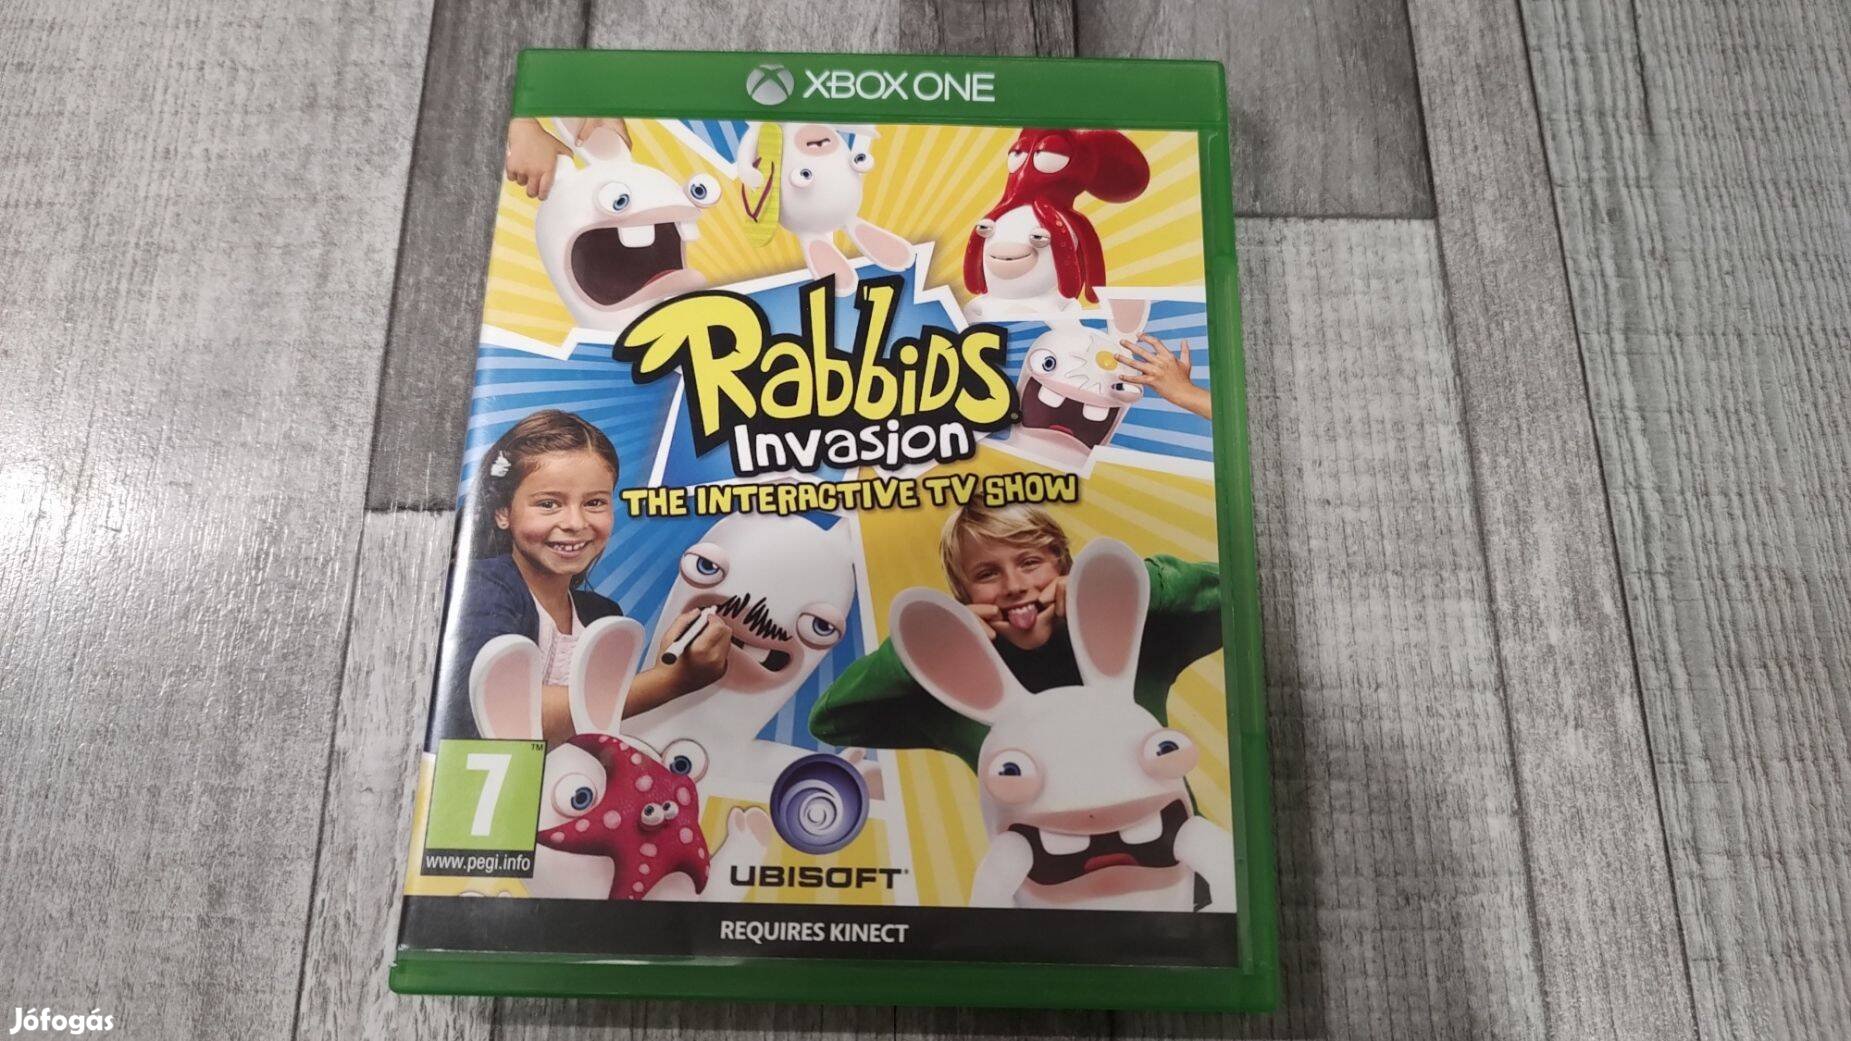 Top Xbox One(S/X) : Kinect Rabbids Invasion The Interactive Tv Show